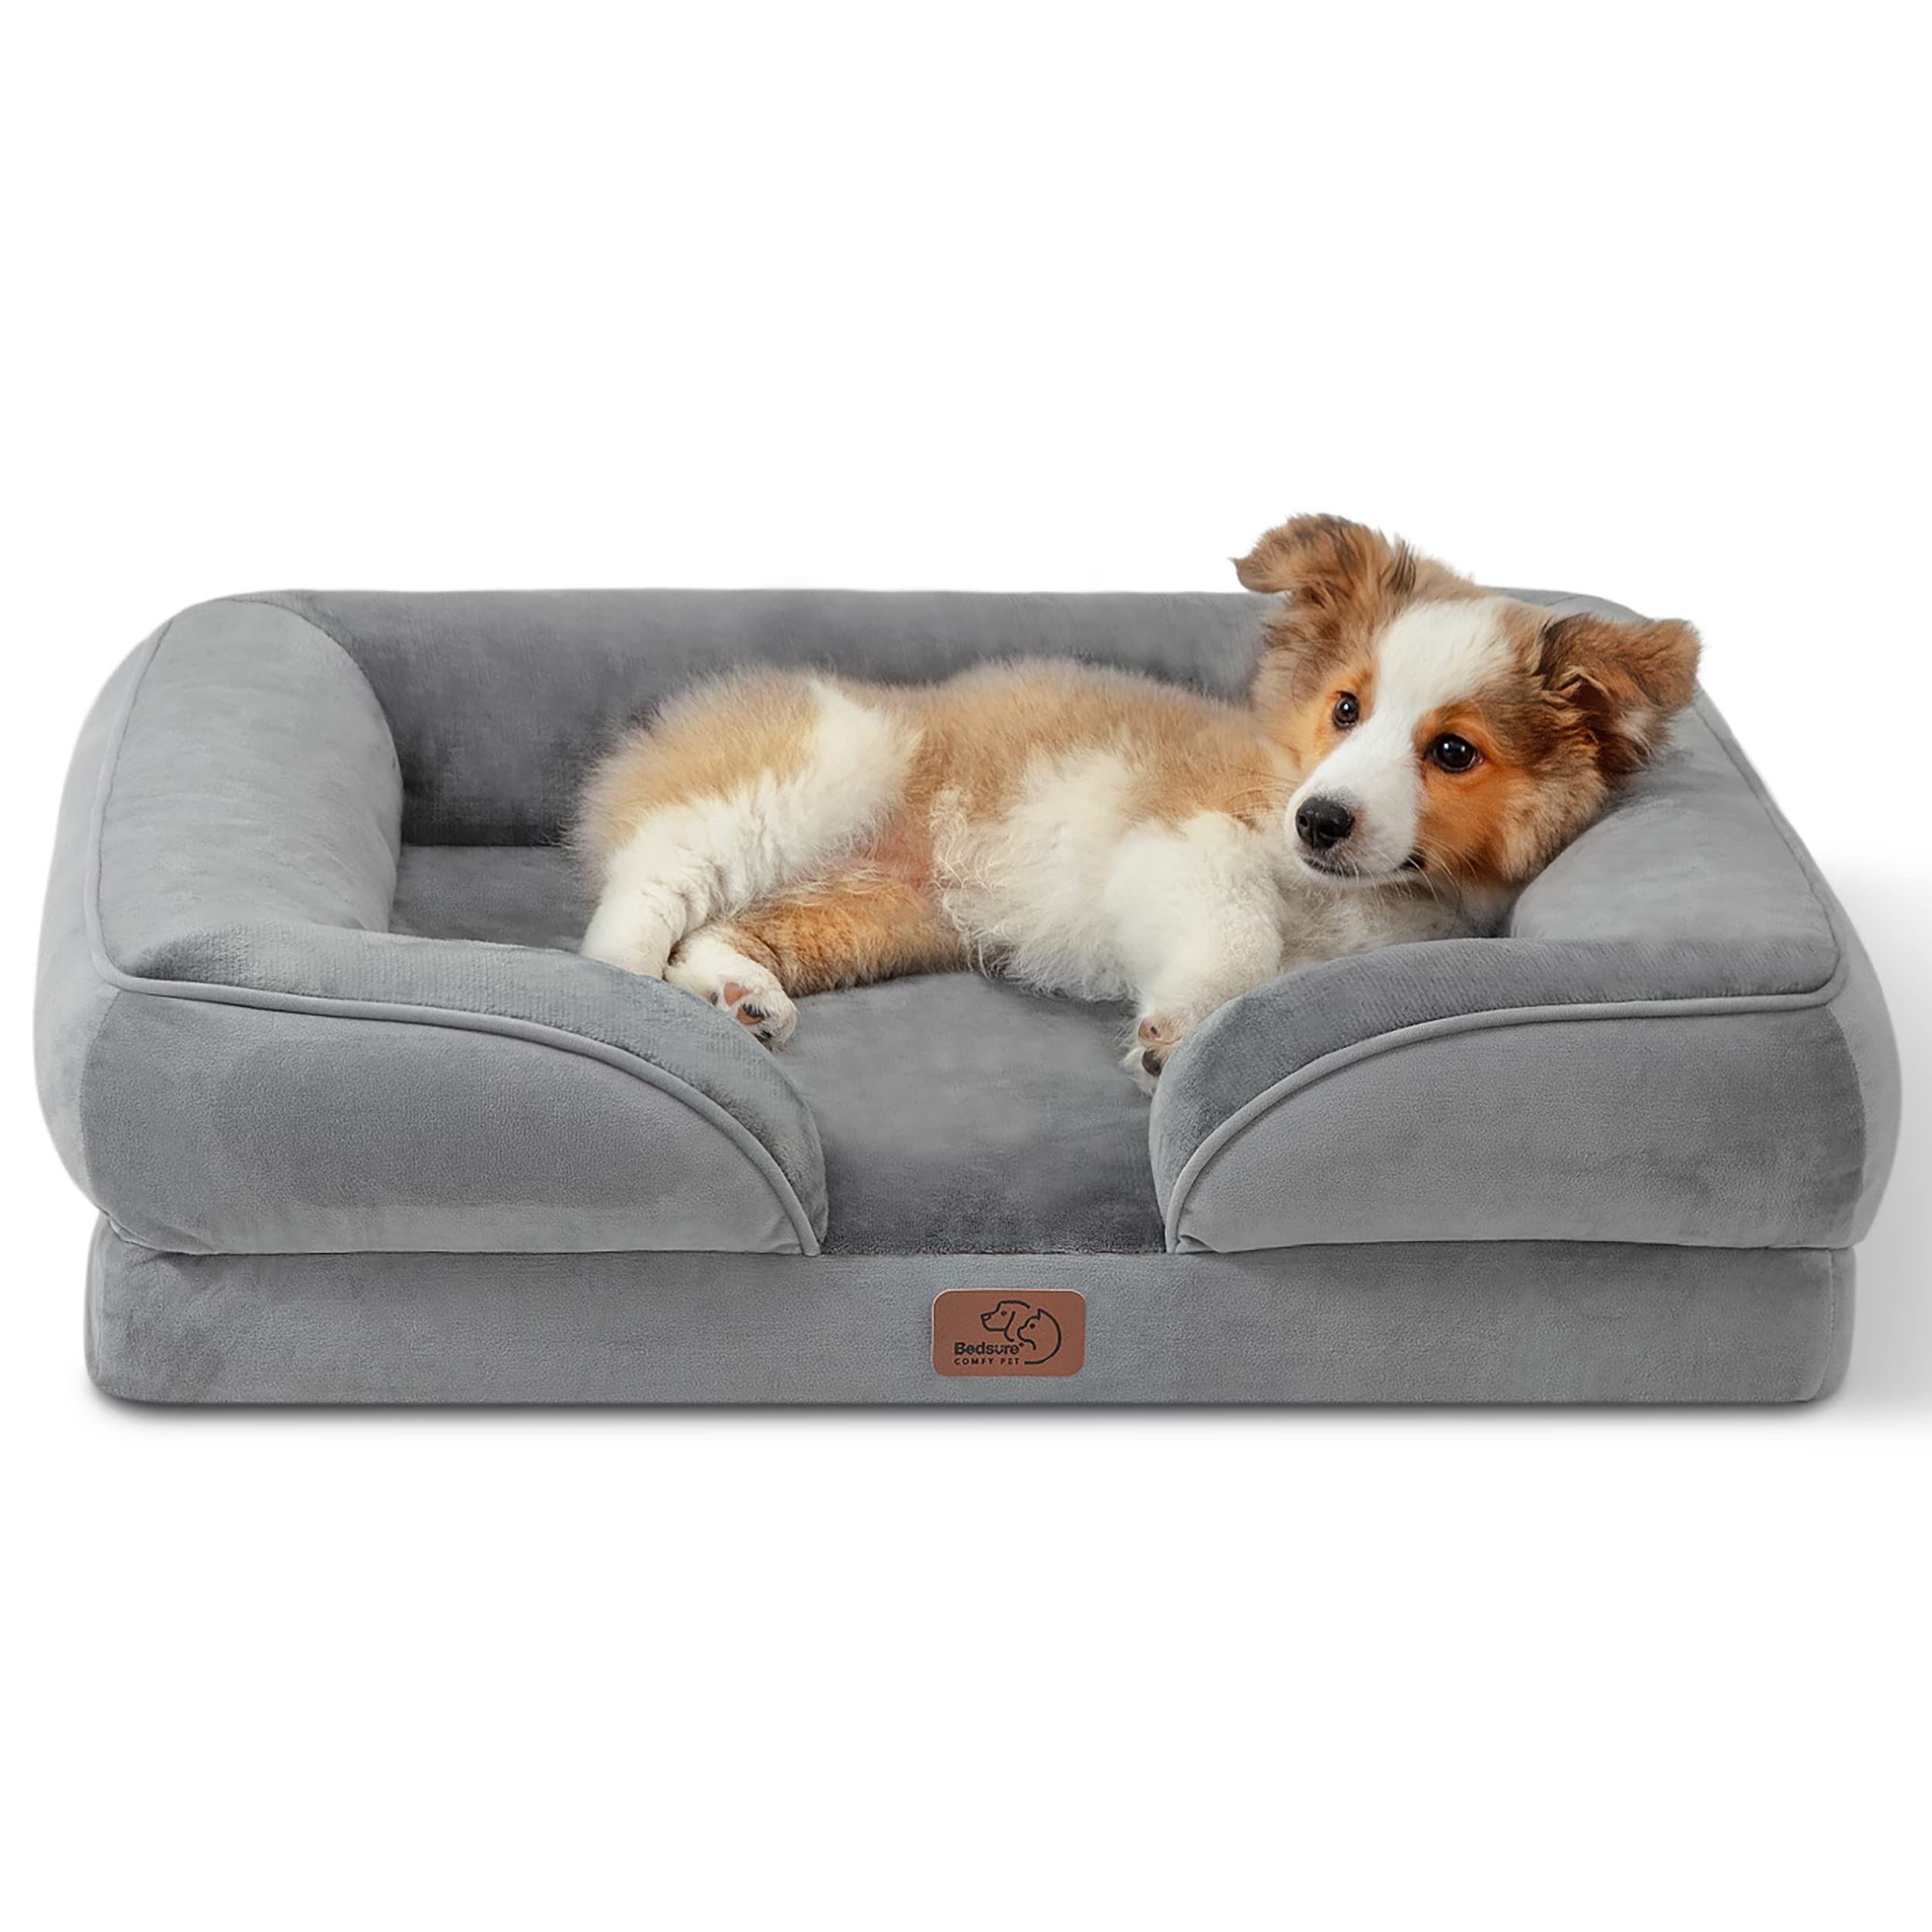 Bedsure Orthopedic Dog Bed Medium - Medium Dog Bed Waterproof, Foam Sofa with Removable Washable Cover, Waterproof Lining and Nonskid Bottom Couch, 28x23x7 Inches, Grey : Amazon.ca: Pet Supplies